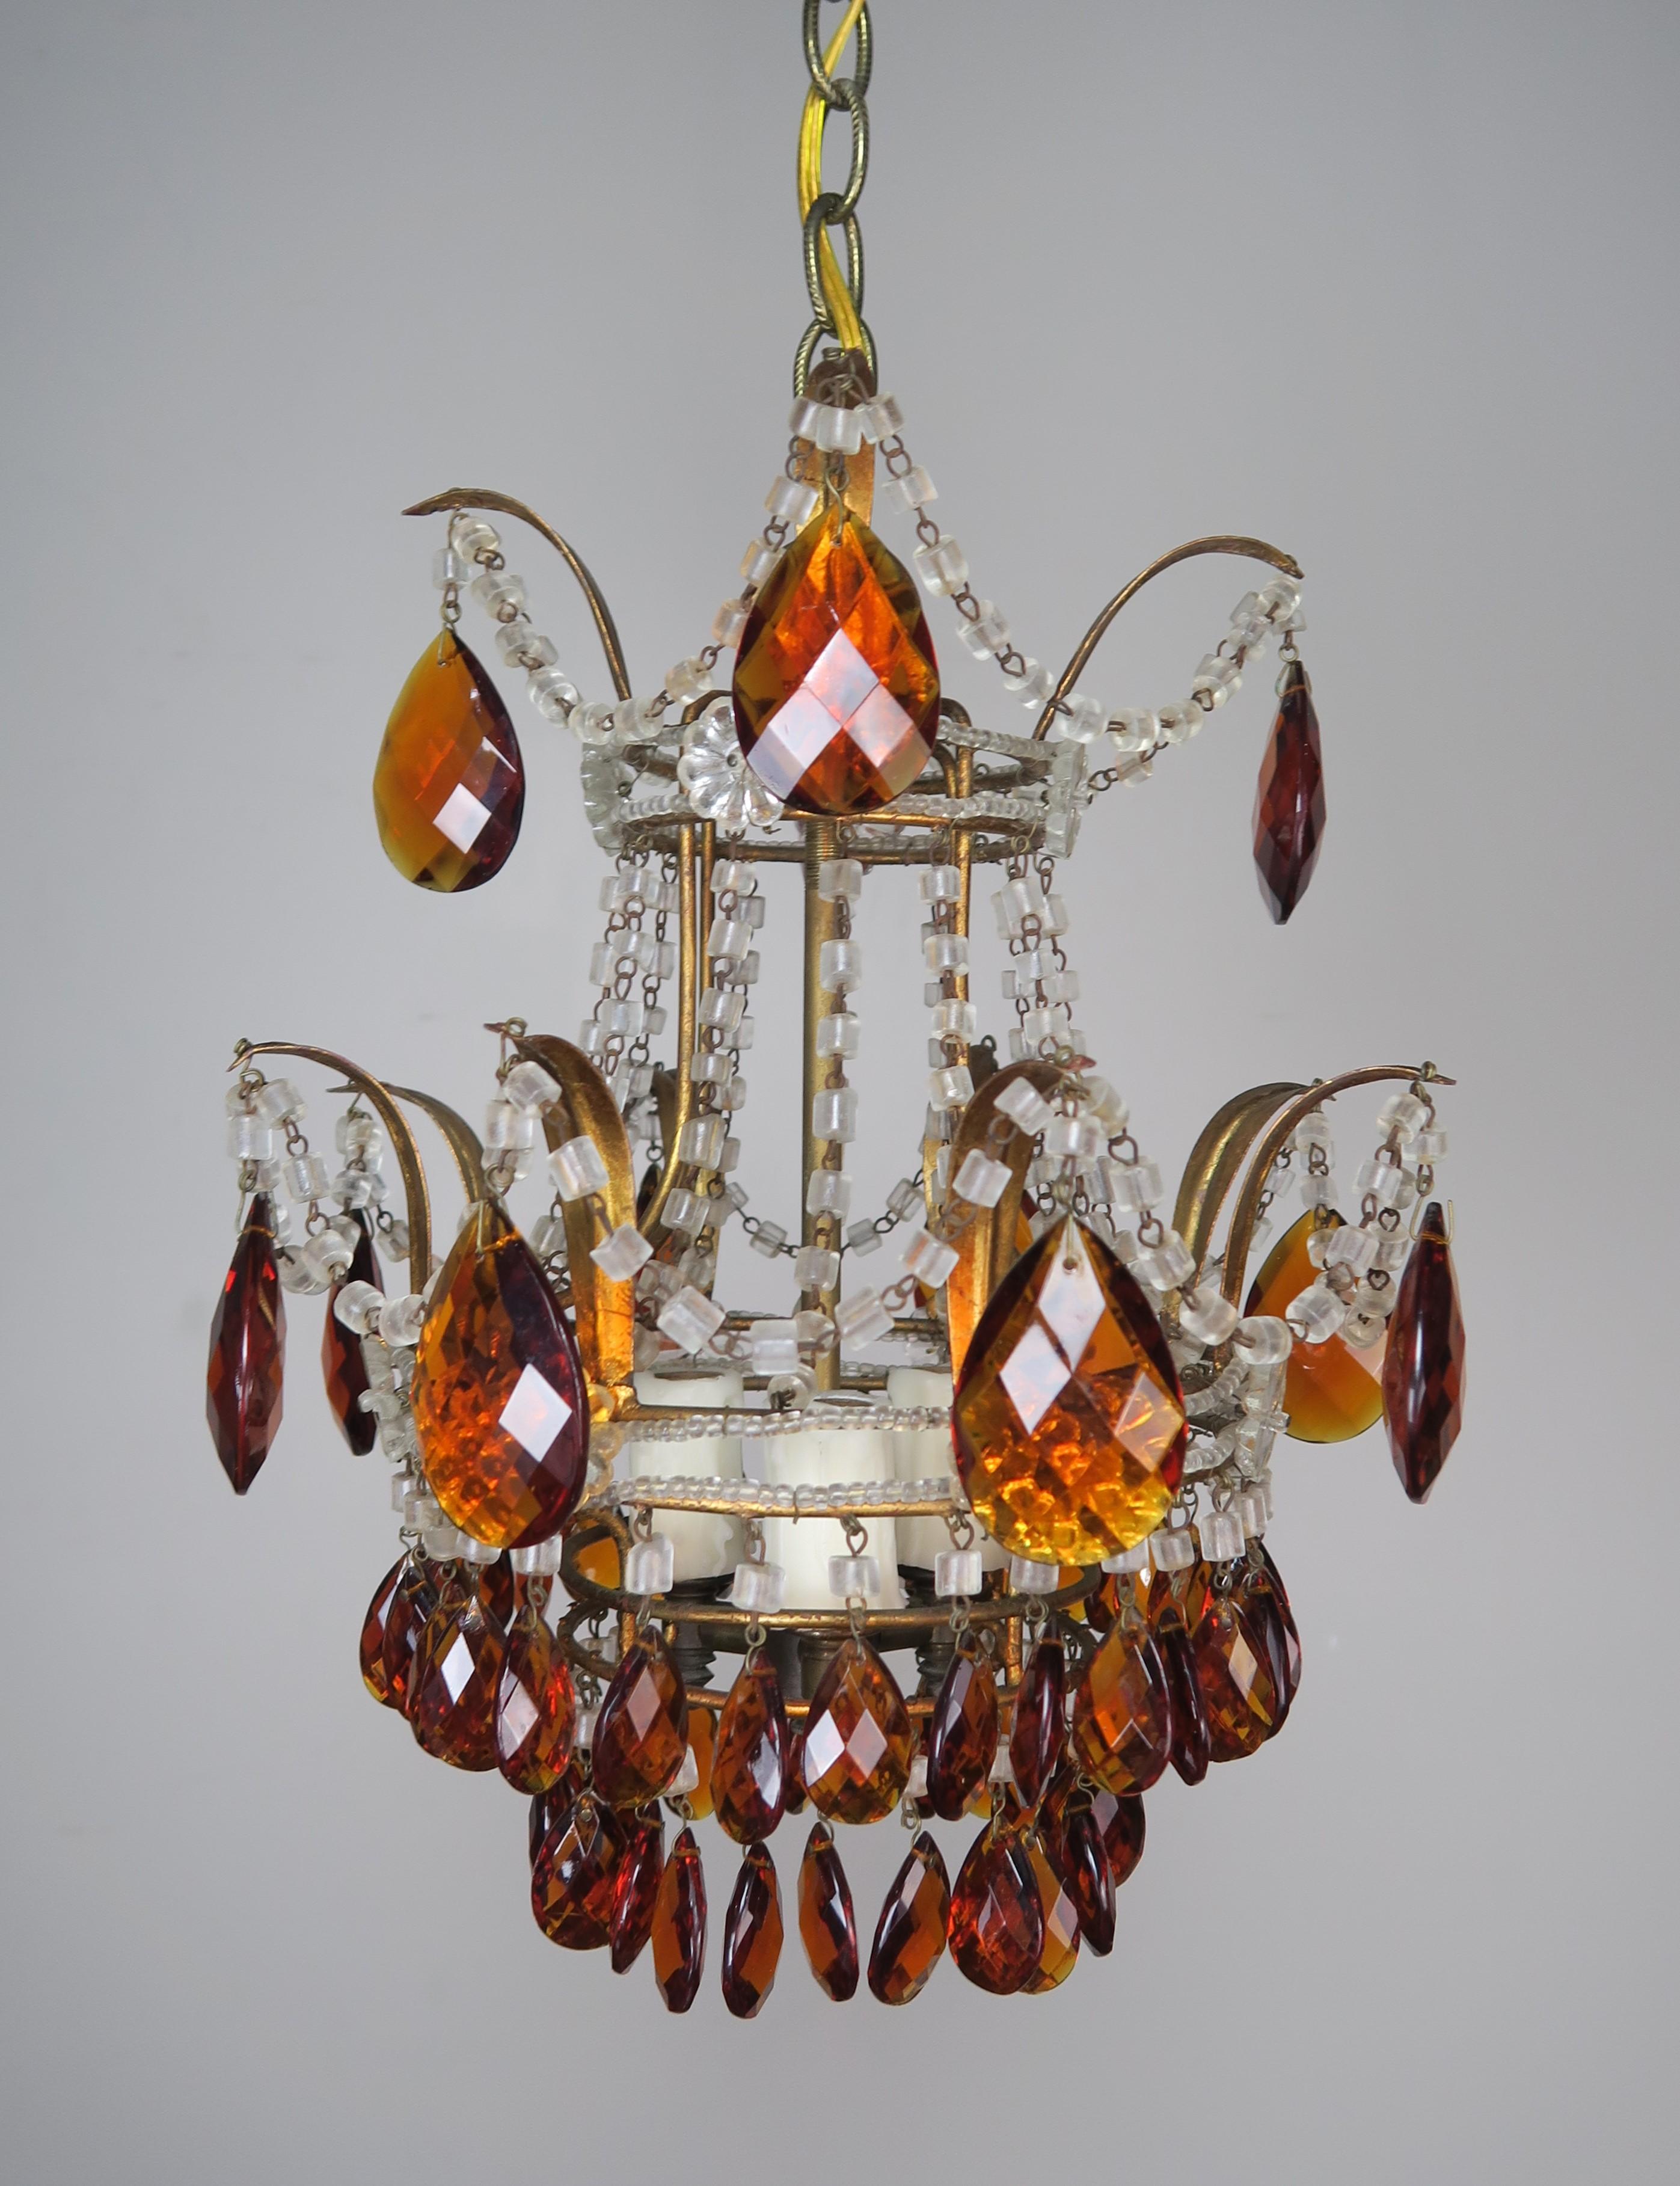 Petite amber crystal macaroni beaded chandelier. This fixture is newly rewired and ready to install. Includes chain and canopy.